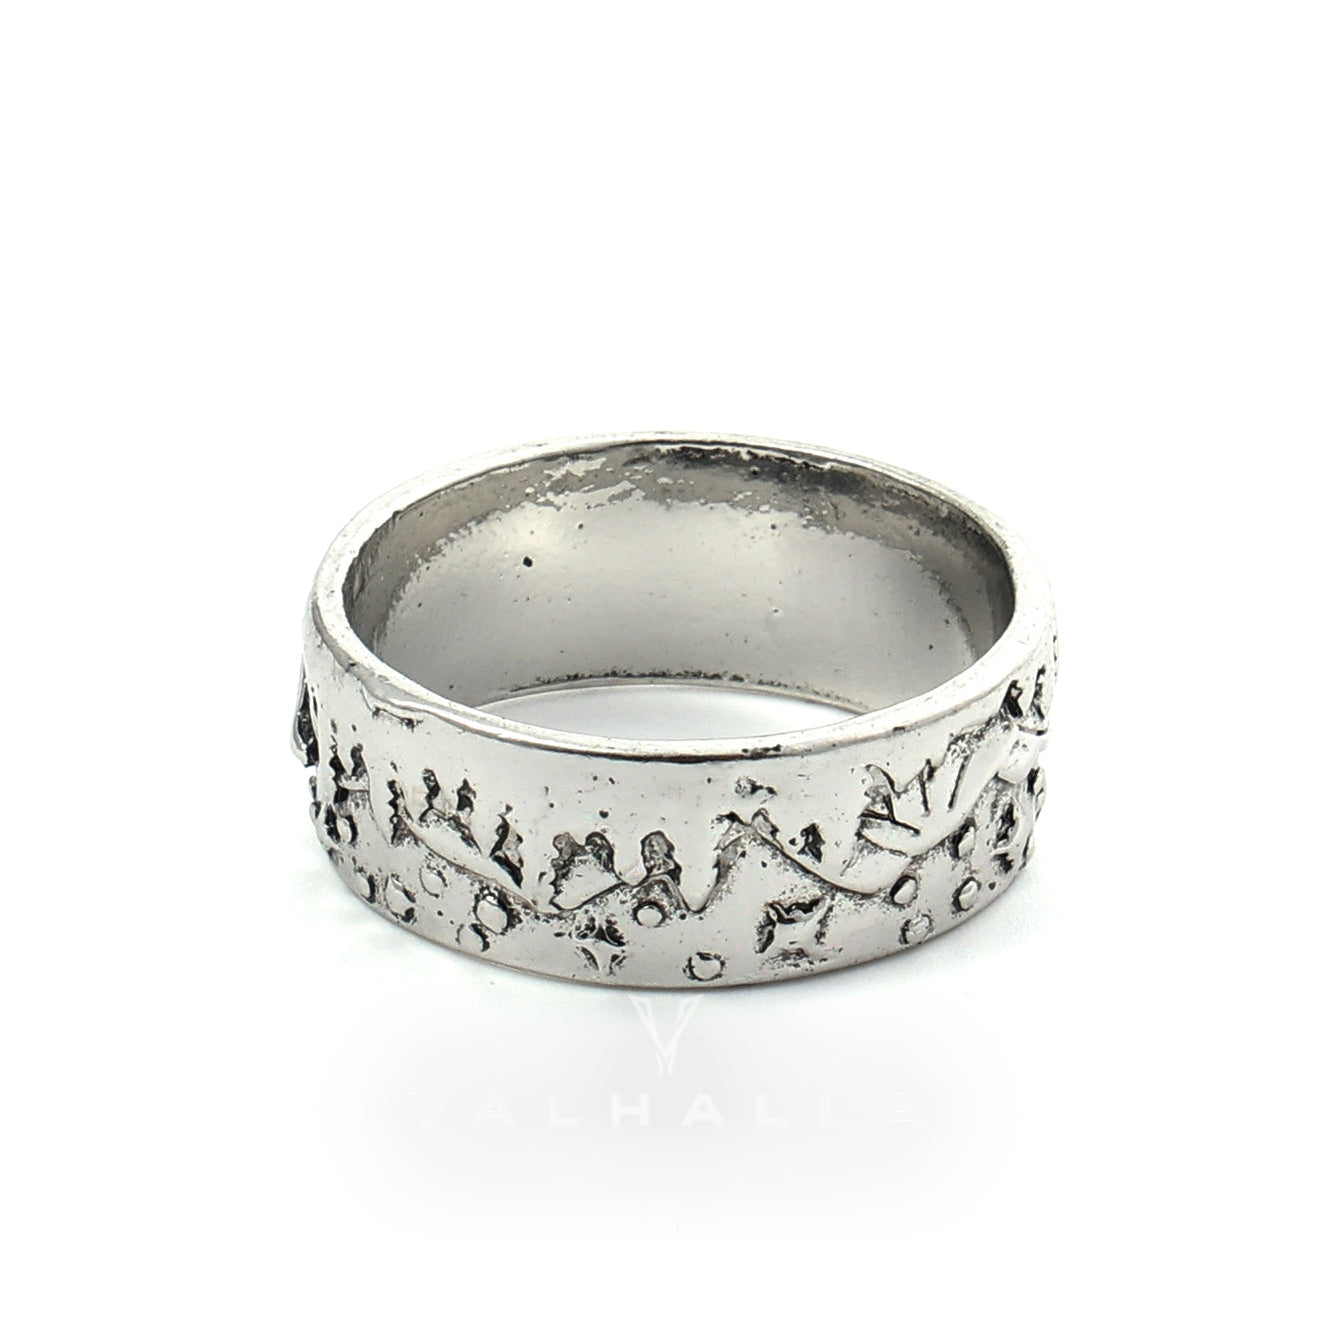 Loyal Wolf Pattern Alloy Embossed Ring